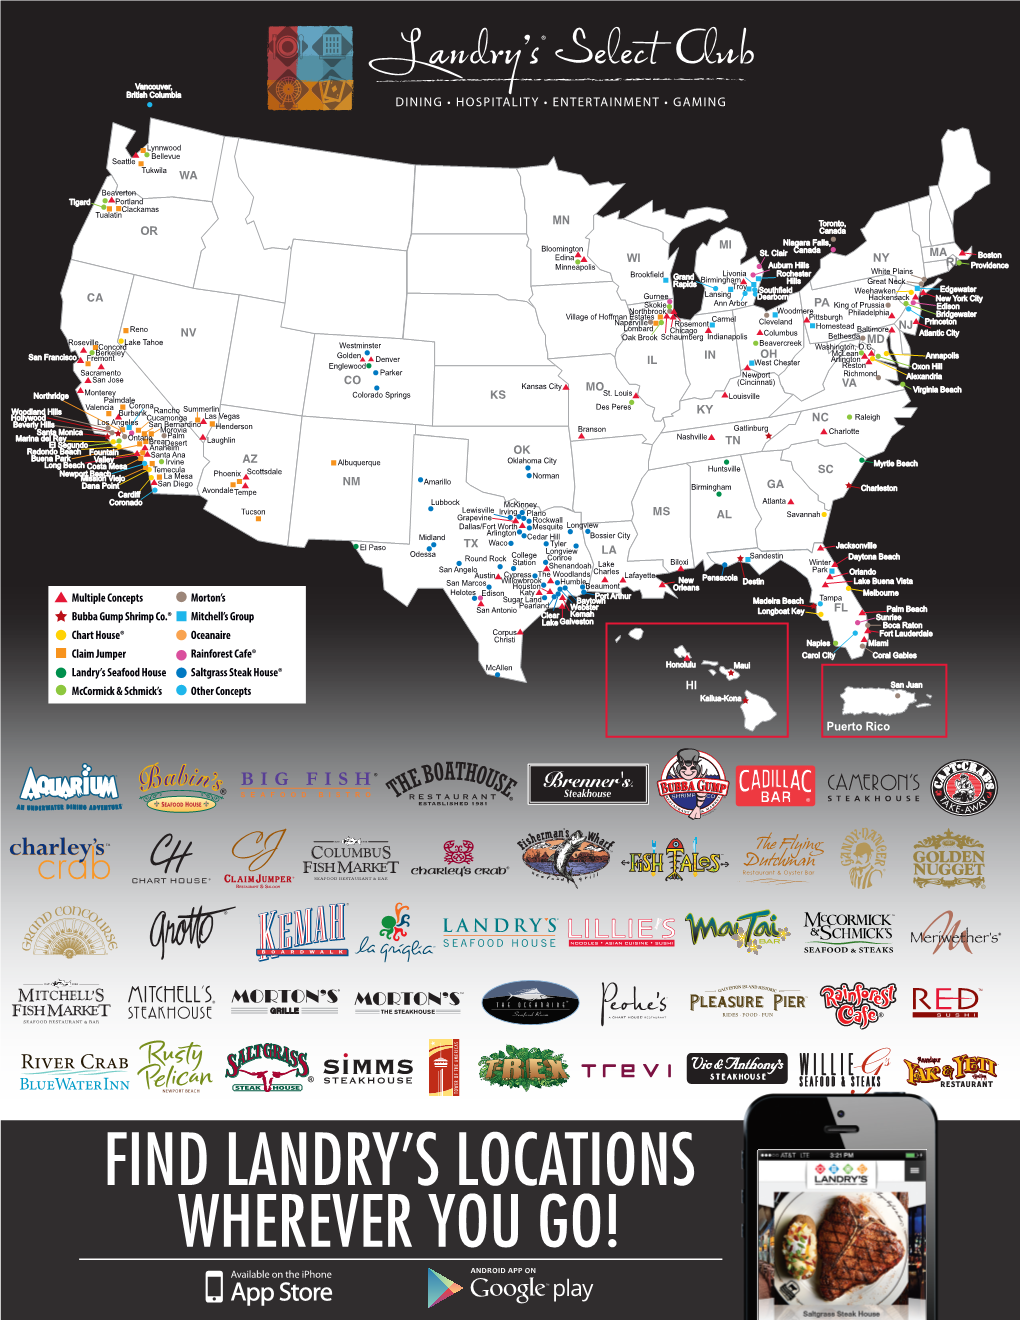 Find Landry's Locations Wherever You